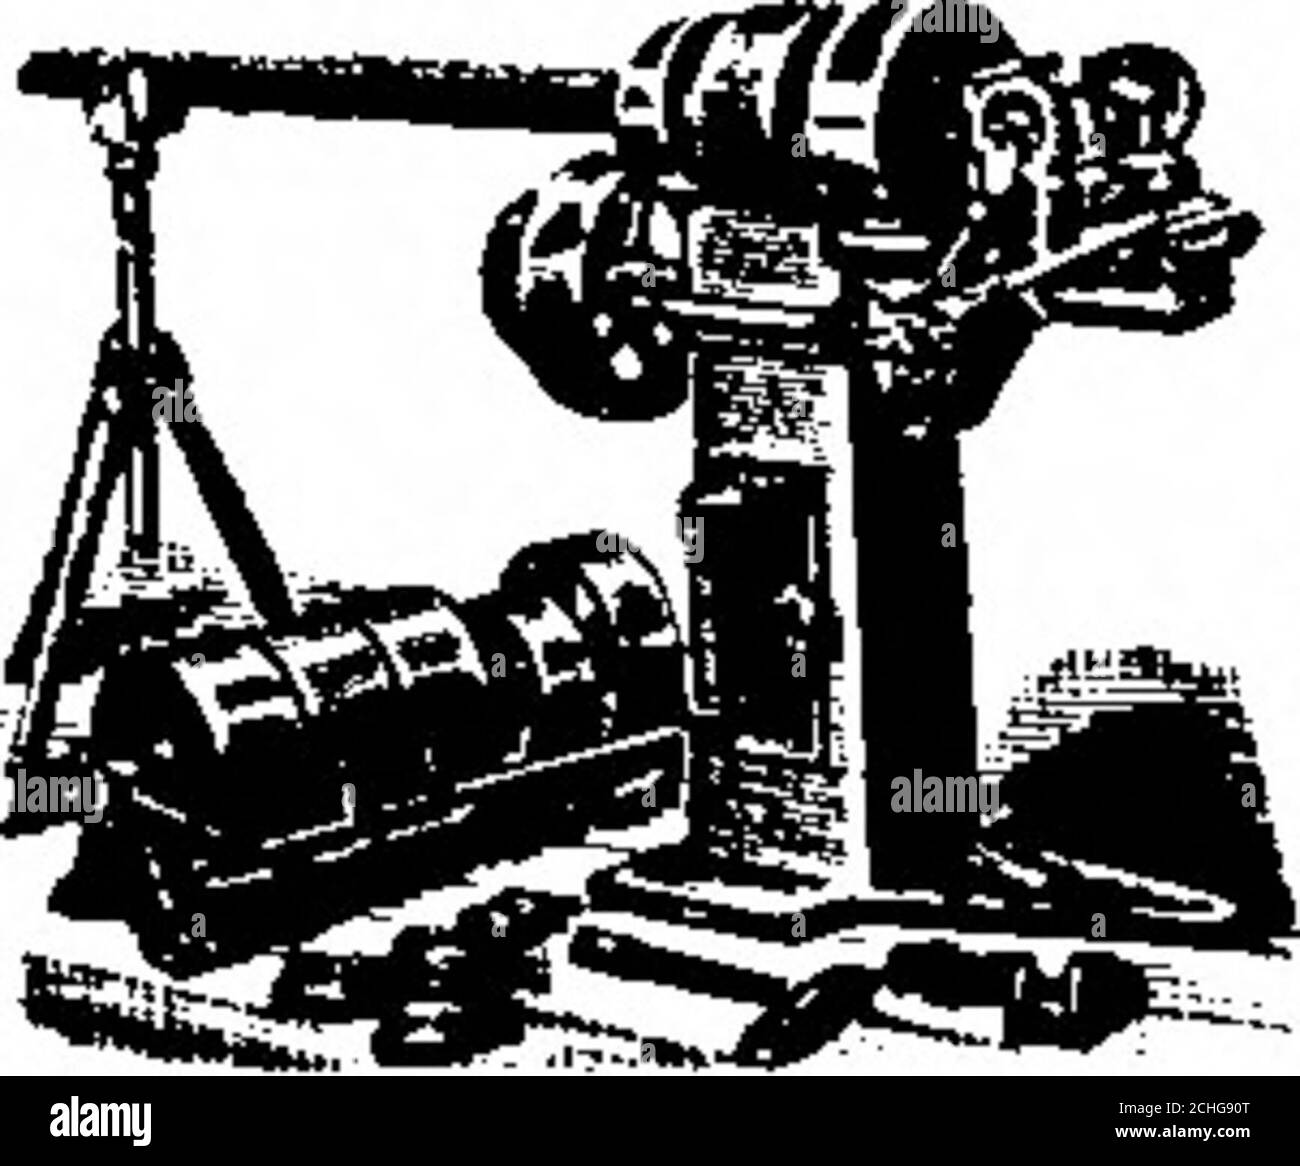 . Scientific American Volume 84 Number 05 (February 1901) . ARMSTRONG S PIPE THREADING. —AND- CUTTING-0FF MACHINES Both Hand and Power. Sizes 1 to 6 inches.Water, Gas, and Steam Fit-ters Tools, Hinged Pipe Vises.Pipe Cutters. Stocks and JHesuniversally acknowledged to beTHE BEST. t3fSendfor catalog.THE ARMSTRONG MFG. CO.Bridgeport, Conn. GASOLINE ENGINES Stock Photo